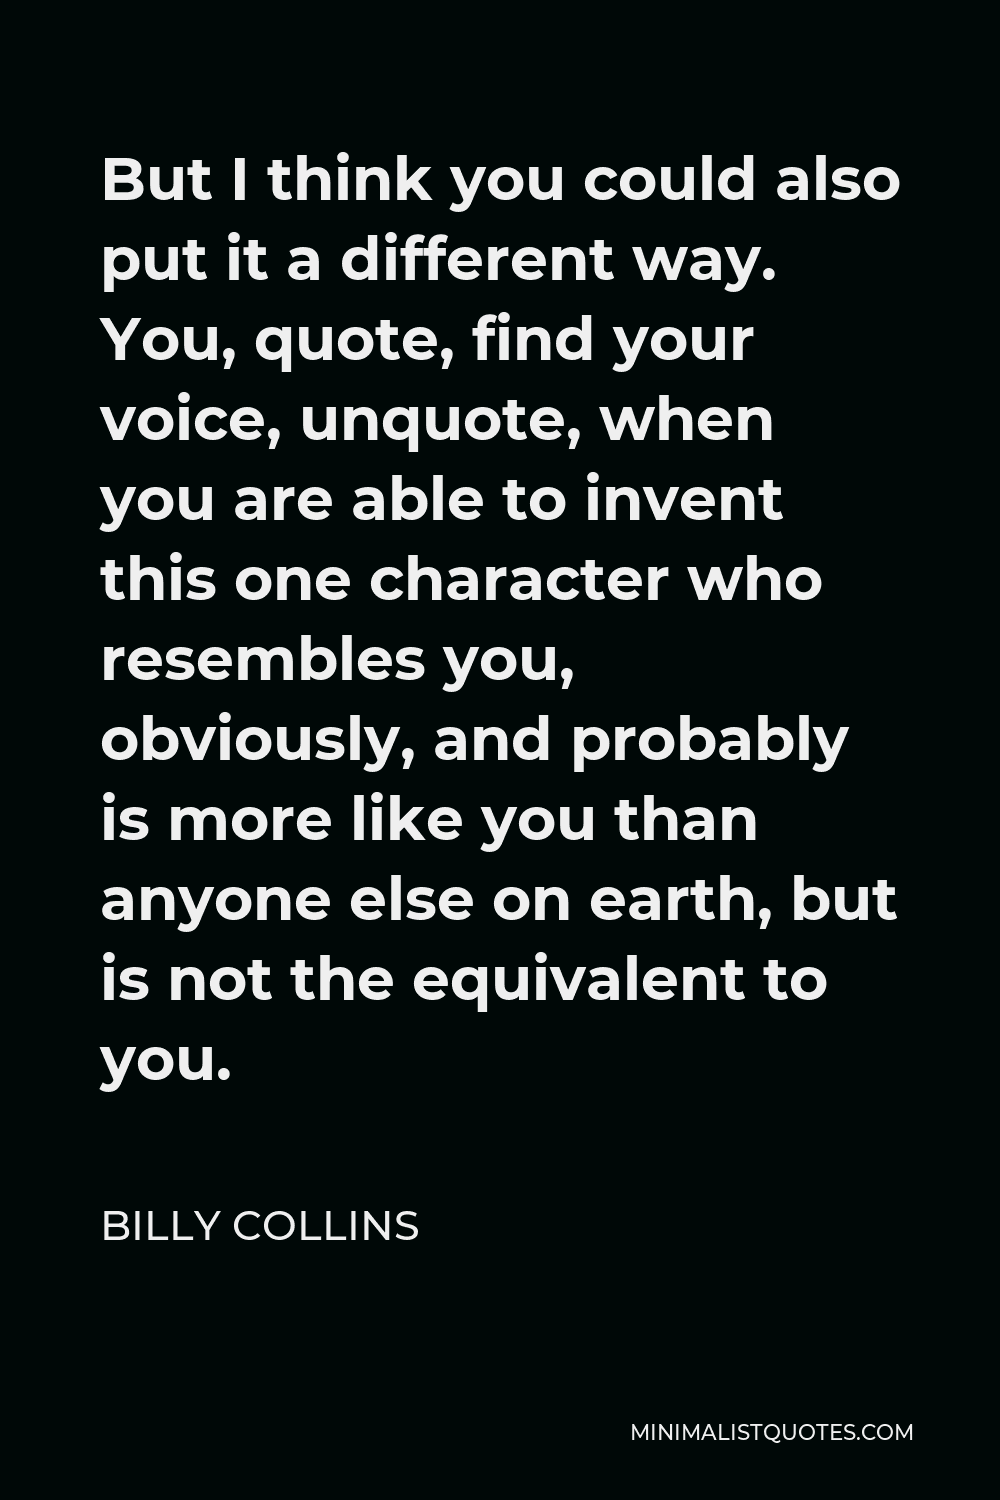 Billy Collins Quote - But I think you could also put it a different way. You, quote, find your voice, unquote, when you are able to invent this one character who resembles you, obviously, and probably is more like you than anyone else on earth, but is not the equivalent to you.